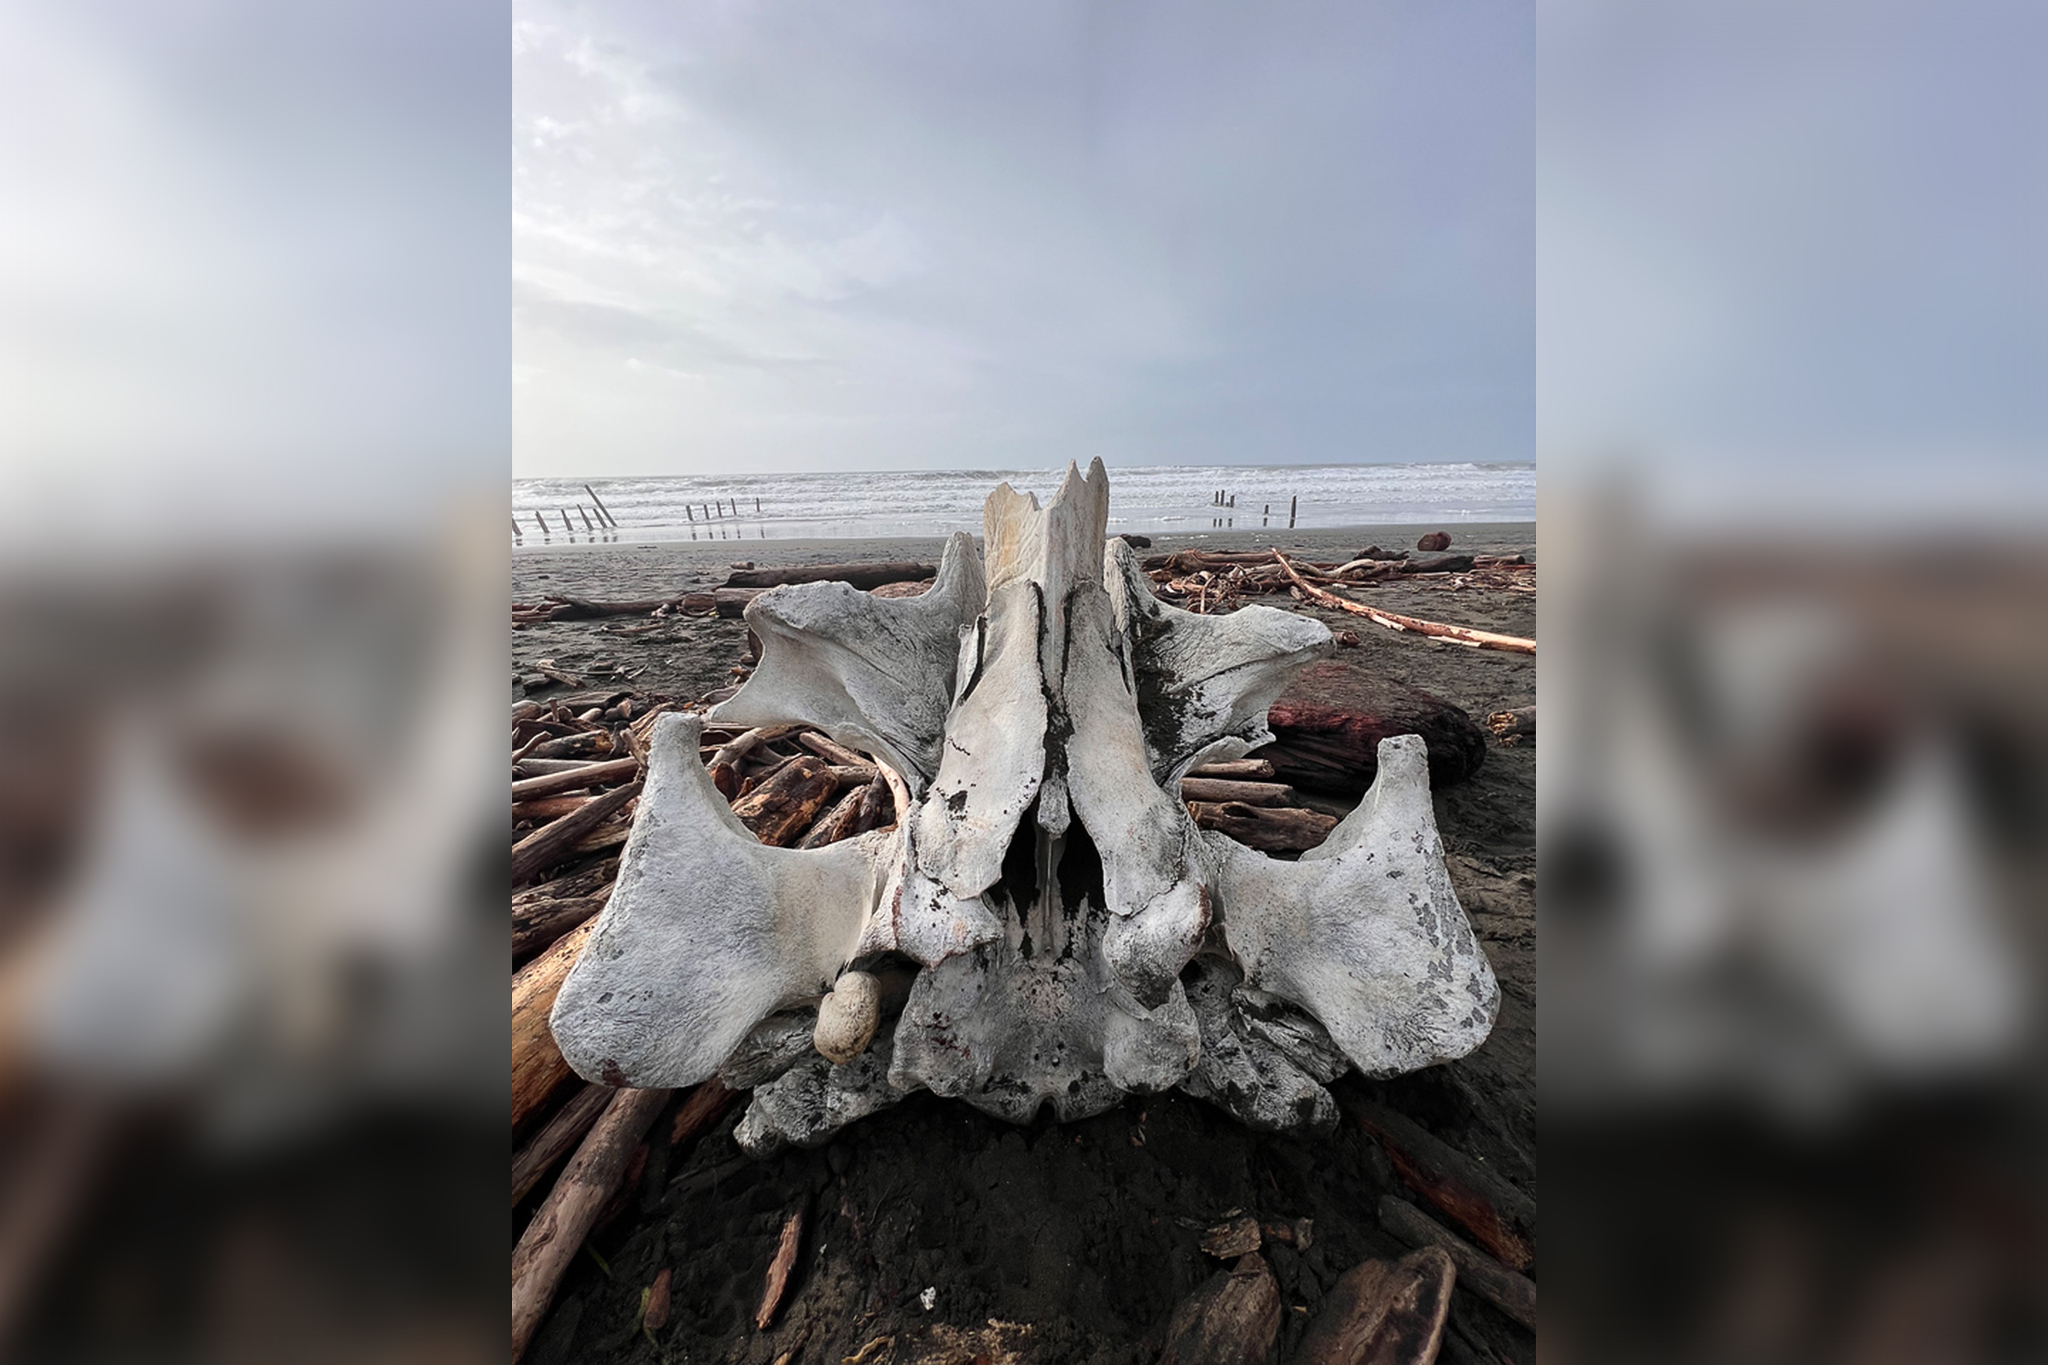 Remains of mysterious large sea creature found at San Francisco beach